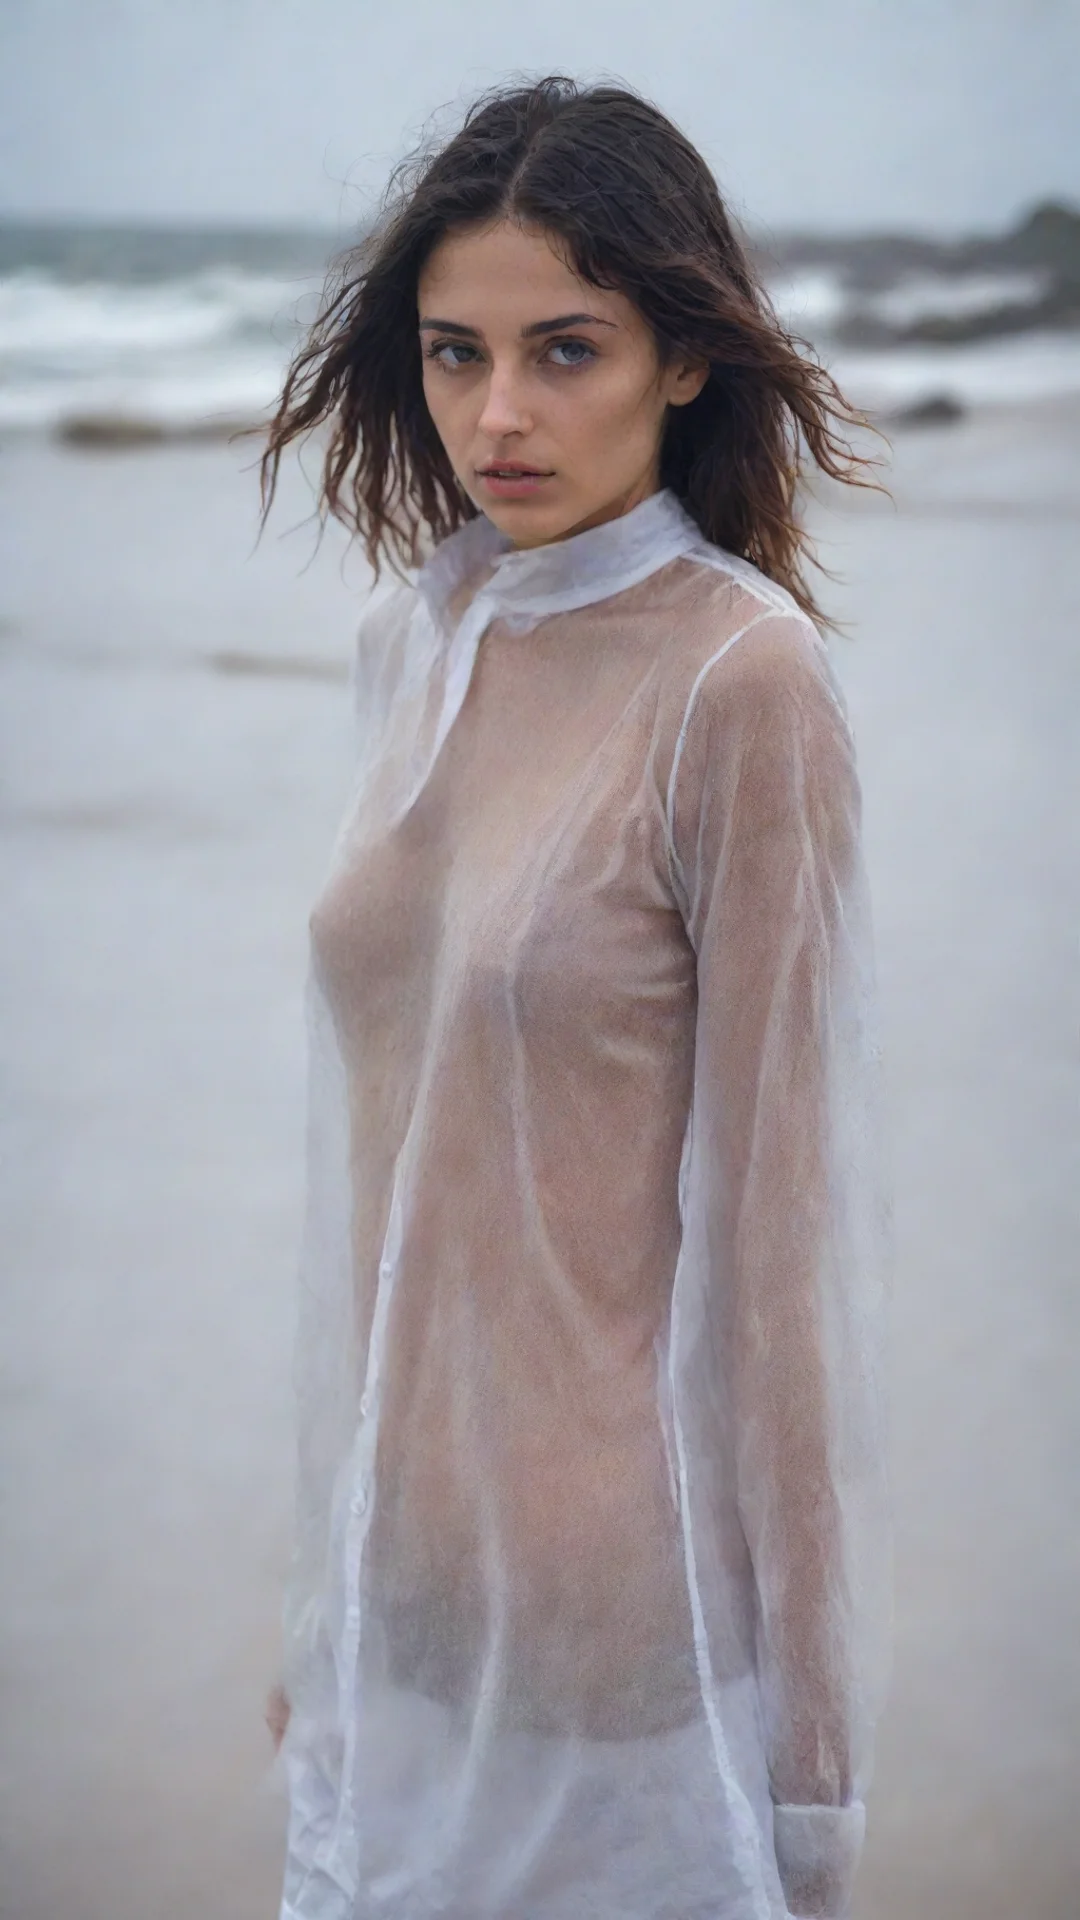 artstation art sensual portrait of a lonely young italian woman in a thin transparent white shirt at a wet and rainy beach good looking trending fantastic 1 confident engaging wow 3 tall